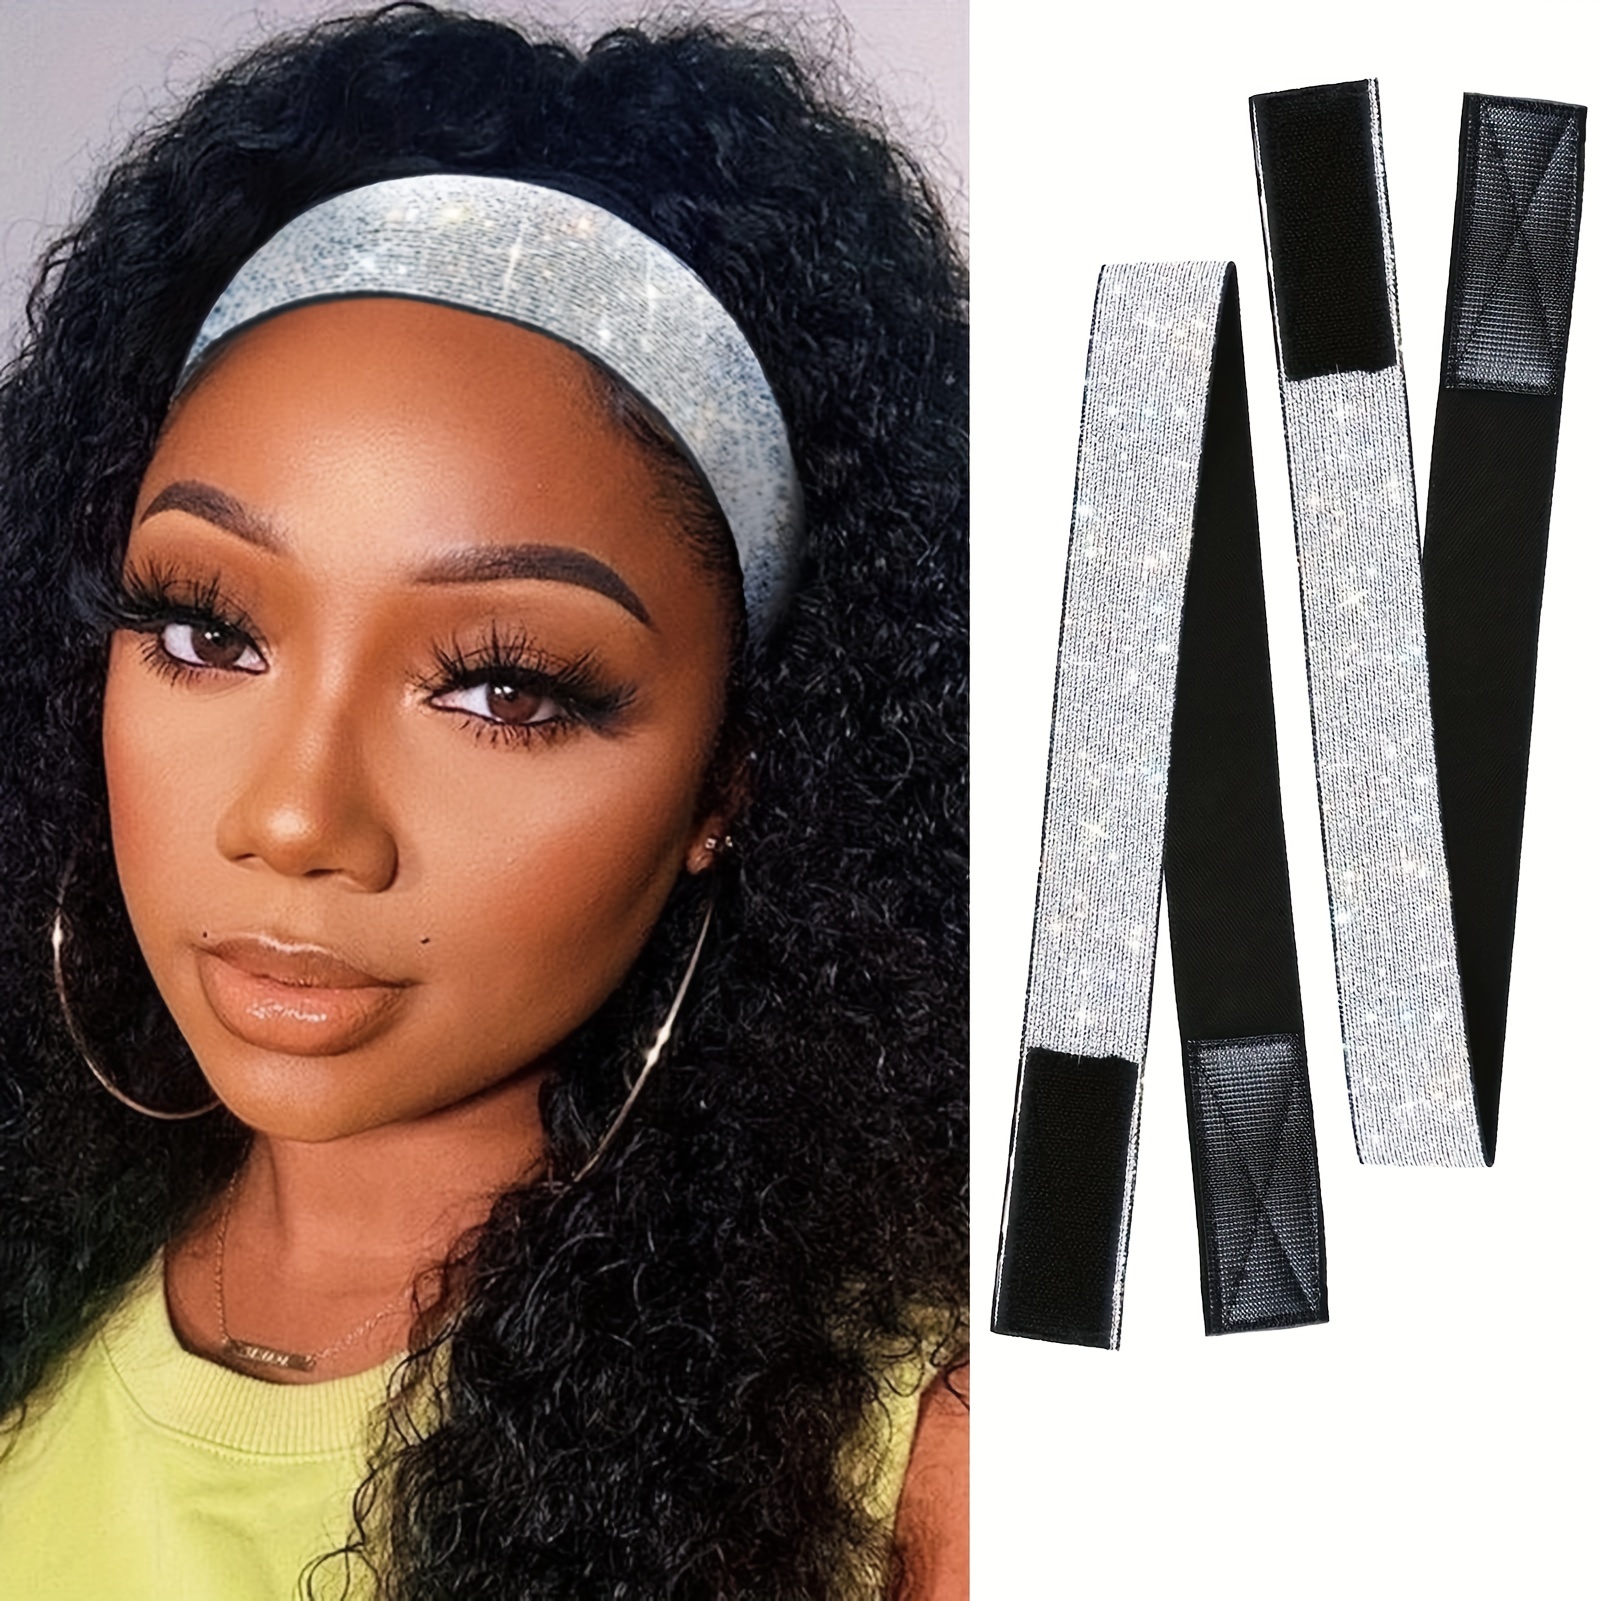 Wig Band For Edges Melt Band For Lace Wigs Adjustable Sticker Band Elastic  Band